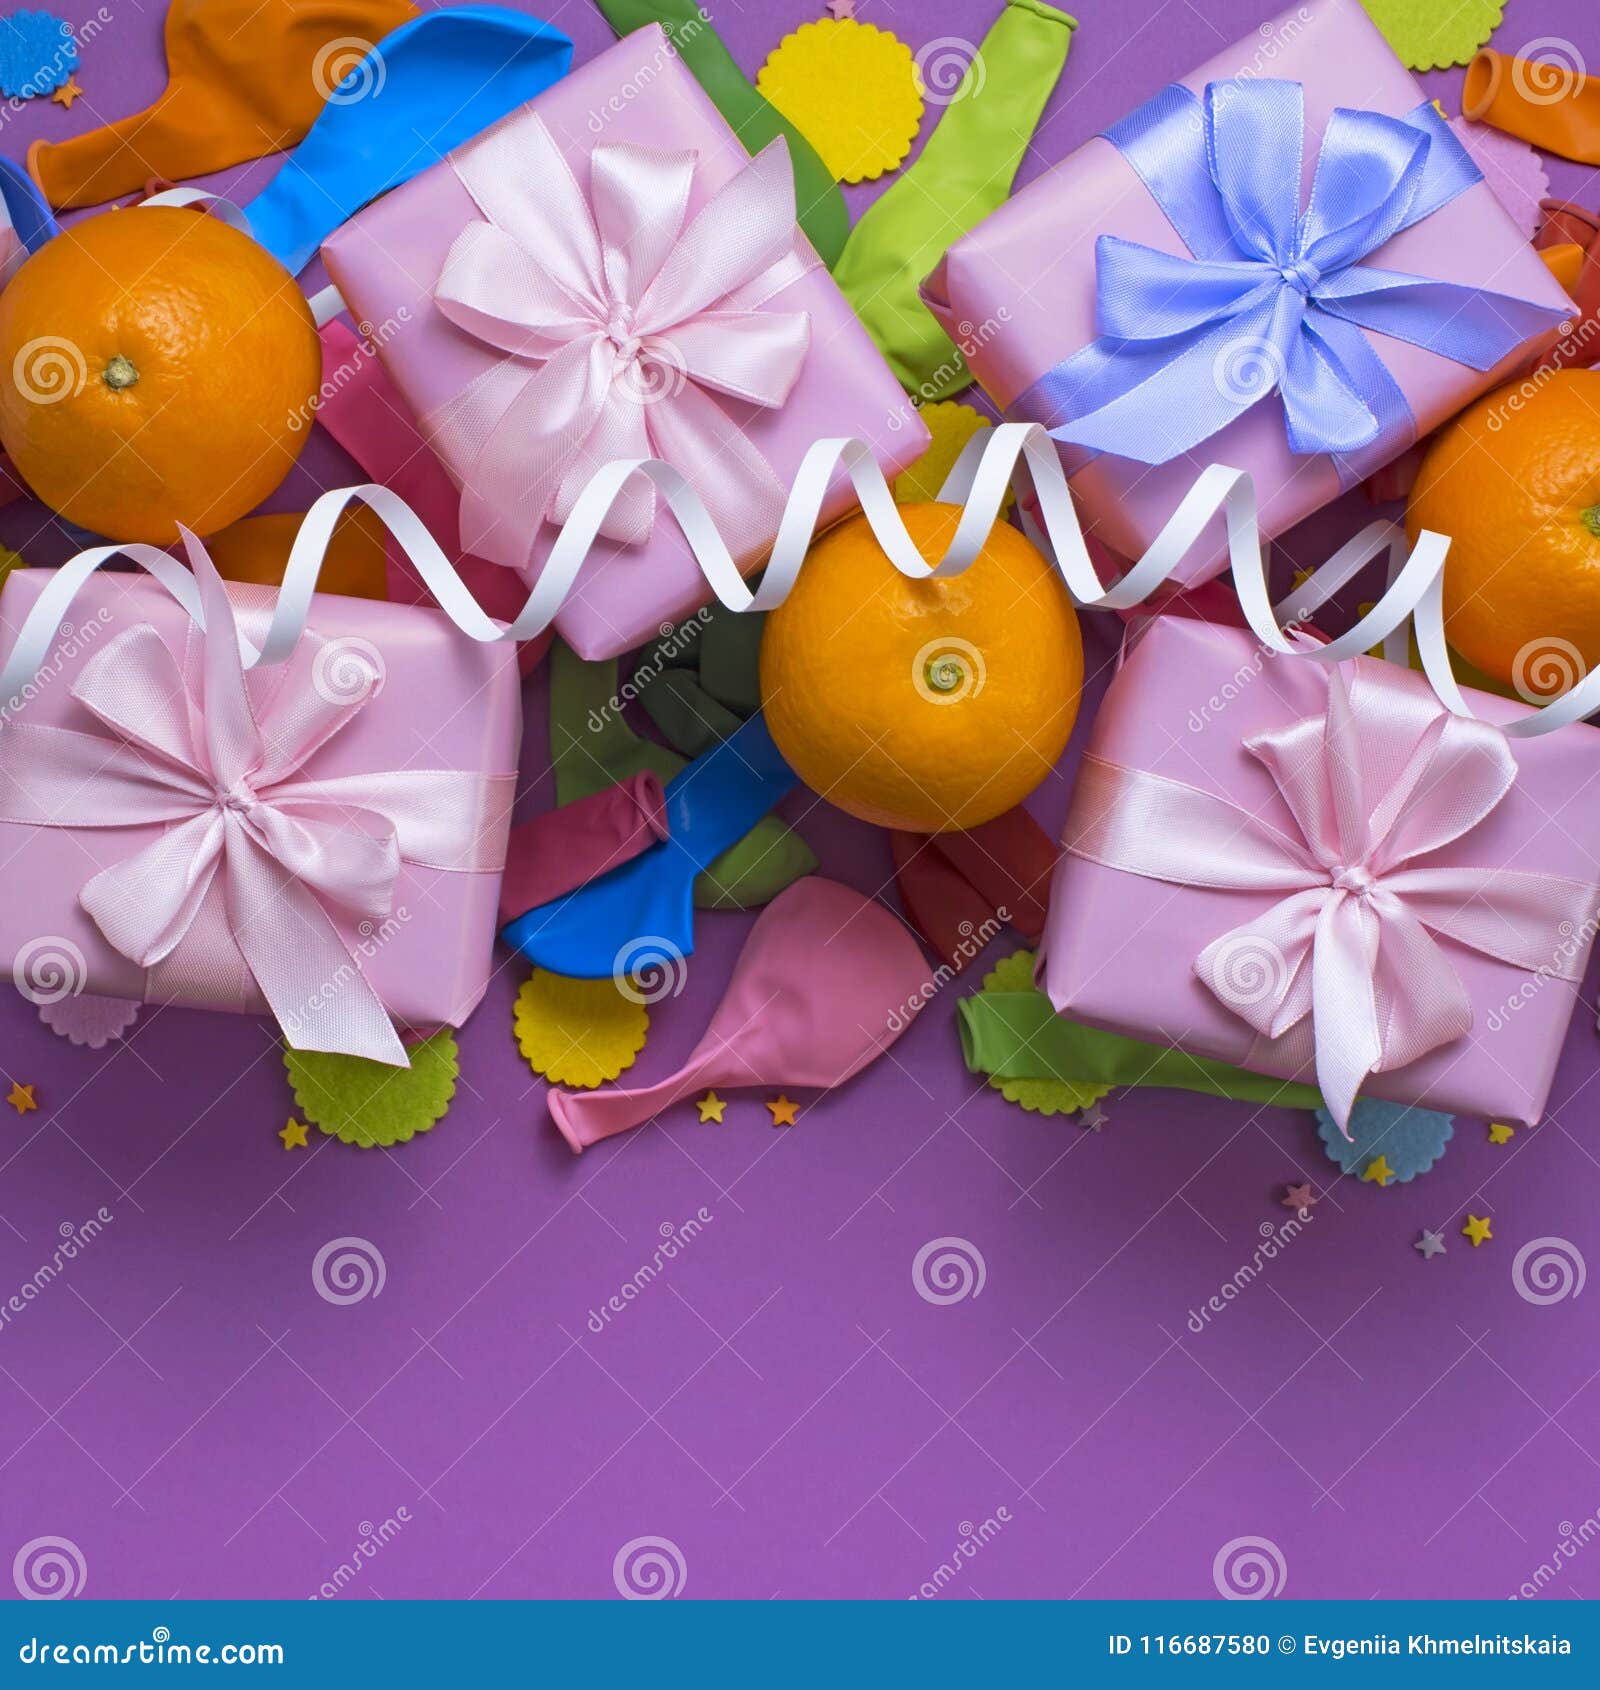 decorative composition four boxes with gifts satin ribbon bow oranges confetti serpentine birthday party.